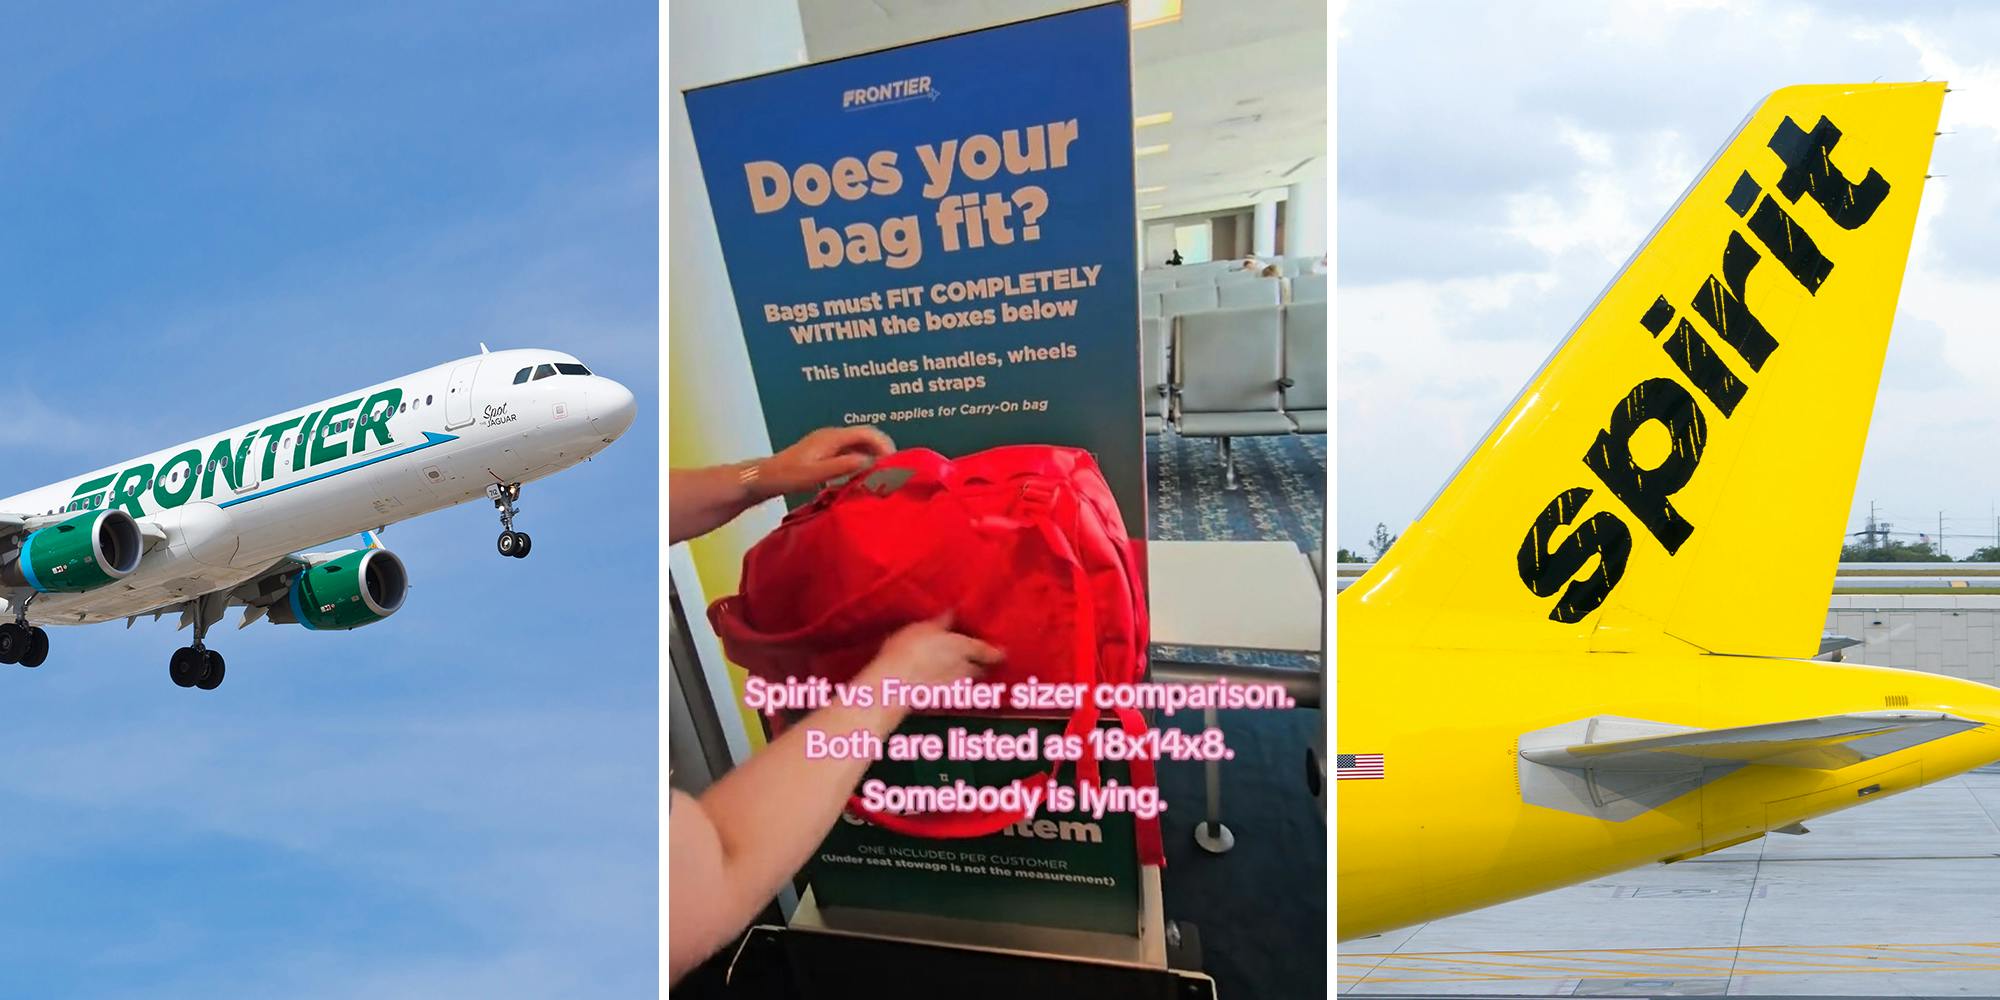 ‘Somebody is lying’: Traveler says Spirit, Frontier may be falsely advertising bag sizes after carry-on incident